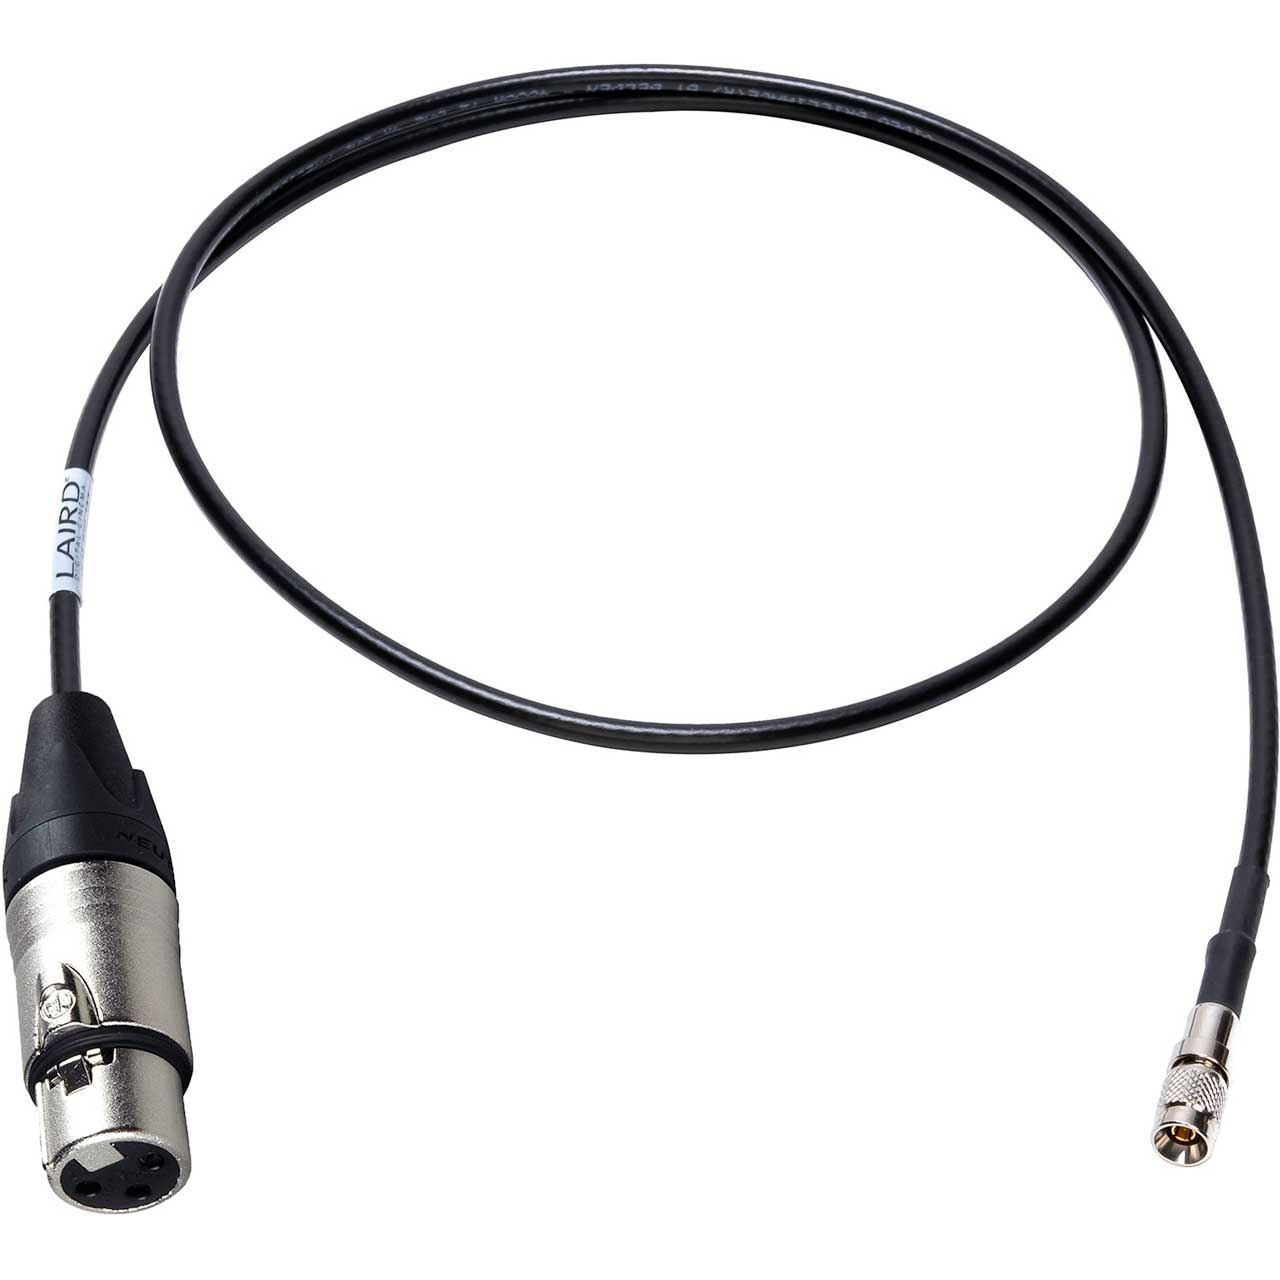 Laird XLF-DIN-015 DIN 1.0/2.3 to XLR-M Time Code Cable - 15 Foot XLF-DIN-015